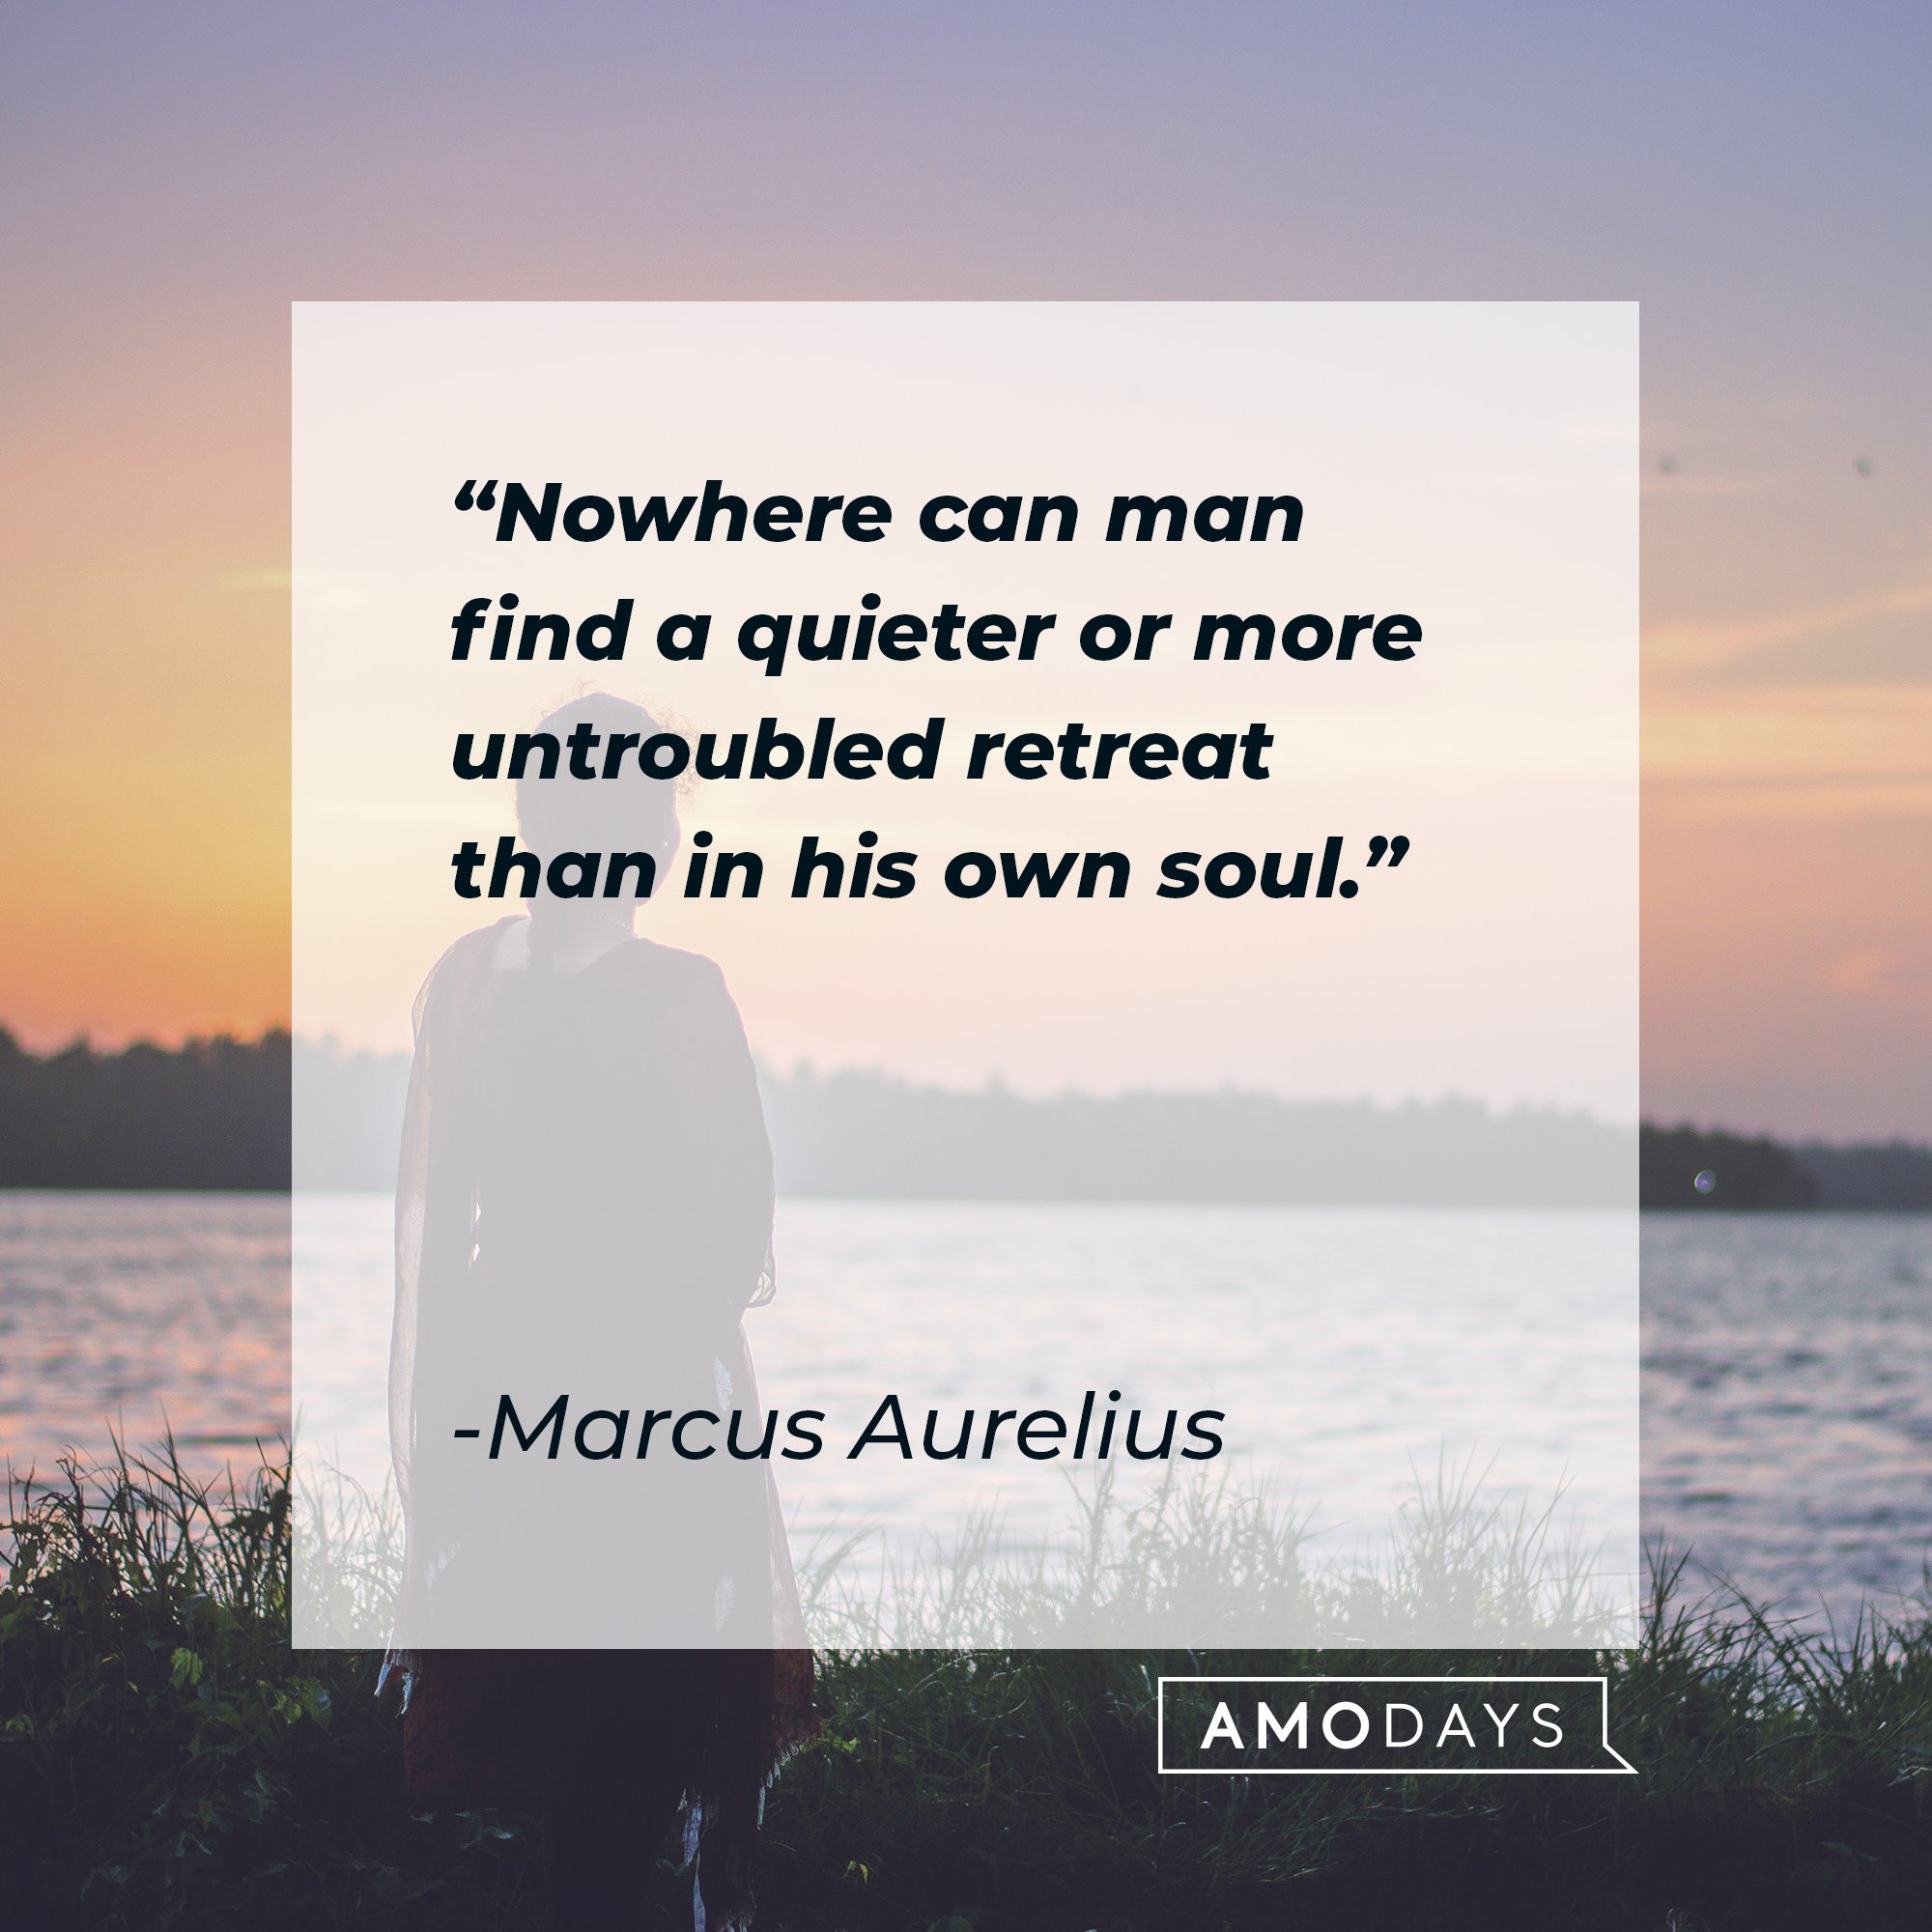 Marcus Aurelius’ quote: "Nowhere can man find a quieter or more untroubled retreat than in his own soul." | Image: AmoDays